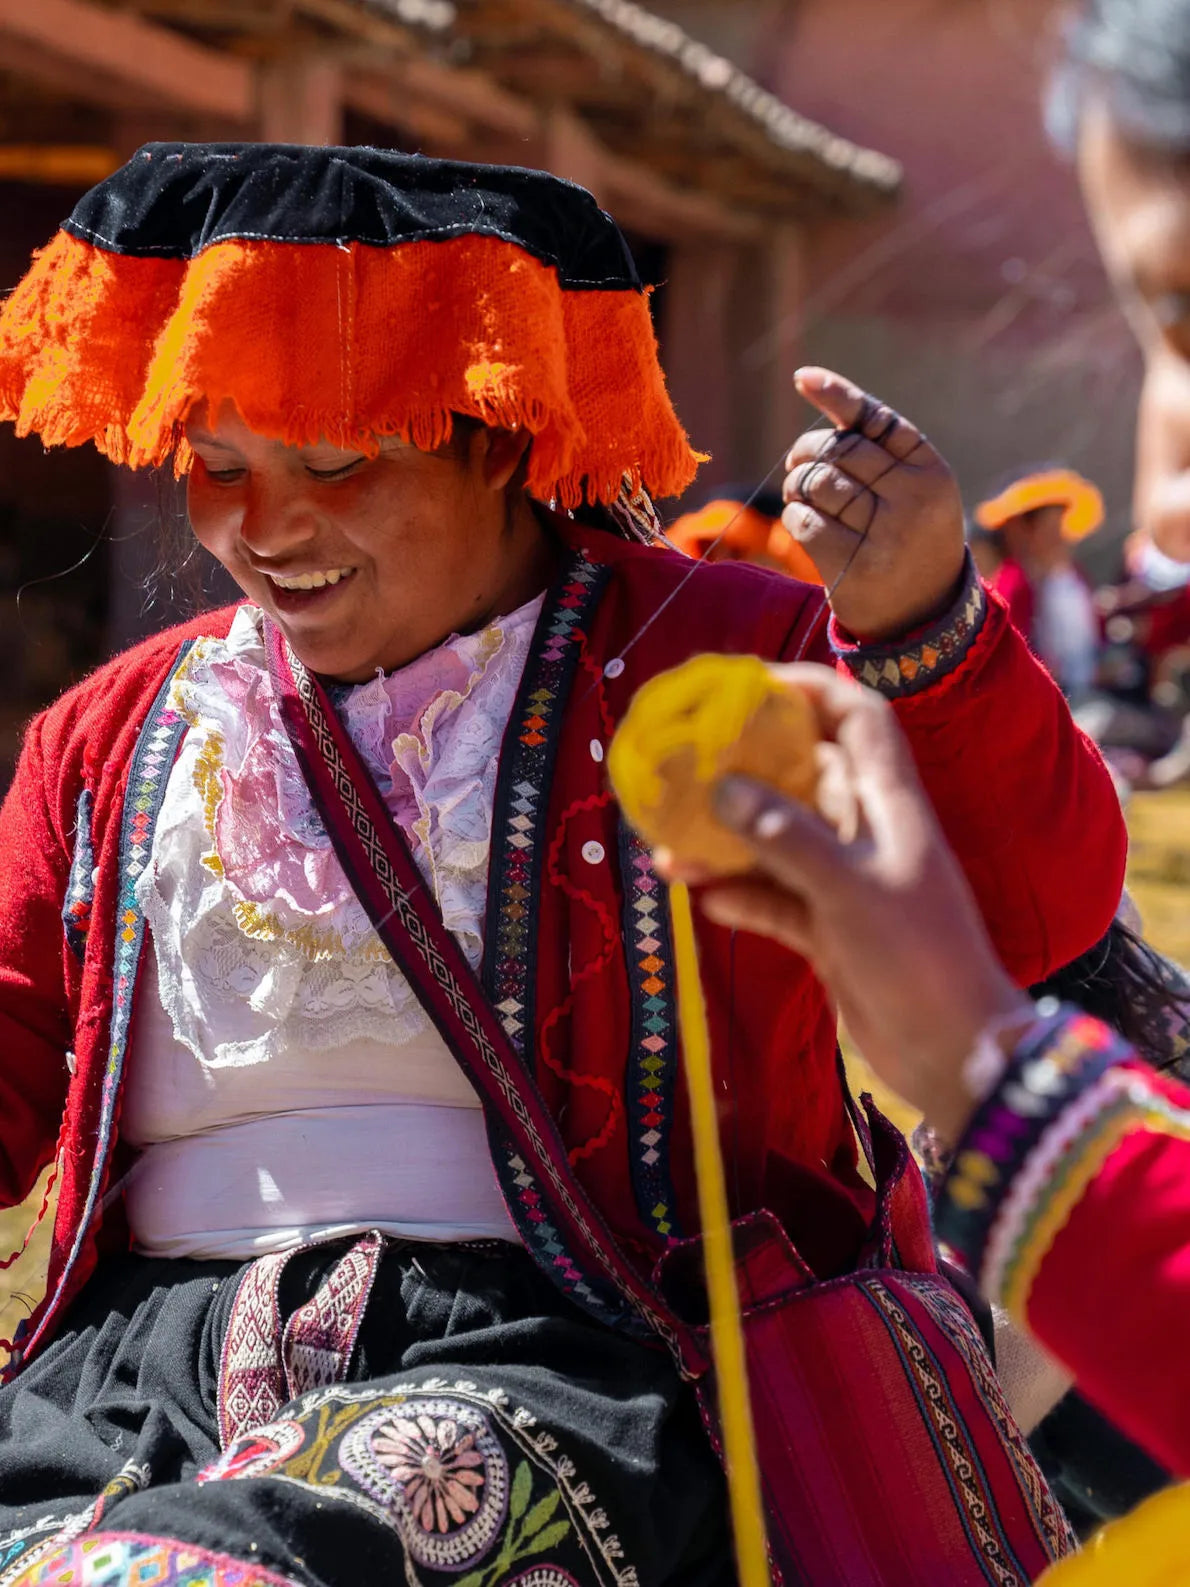 A quechua woman smiling in her traditional costumes